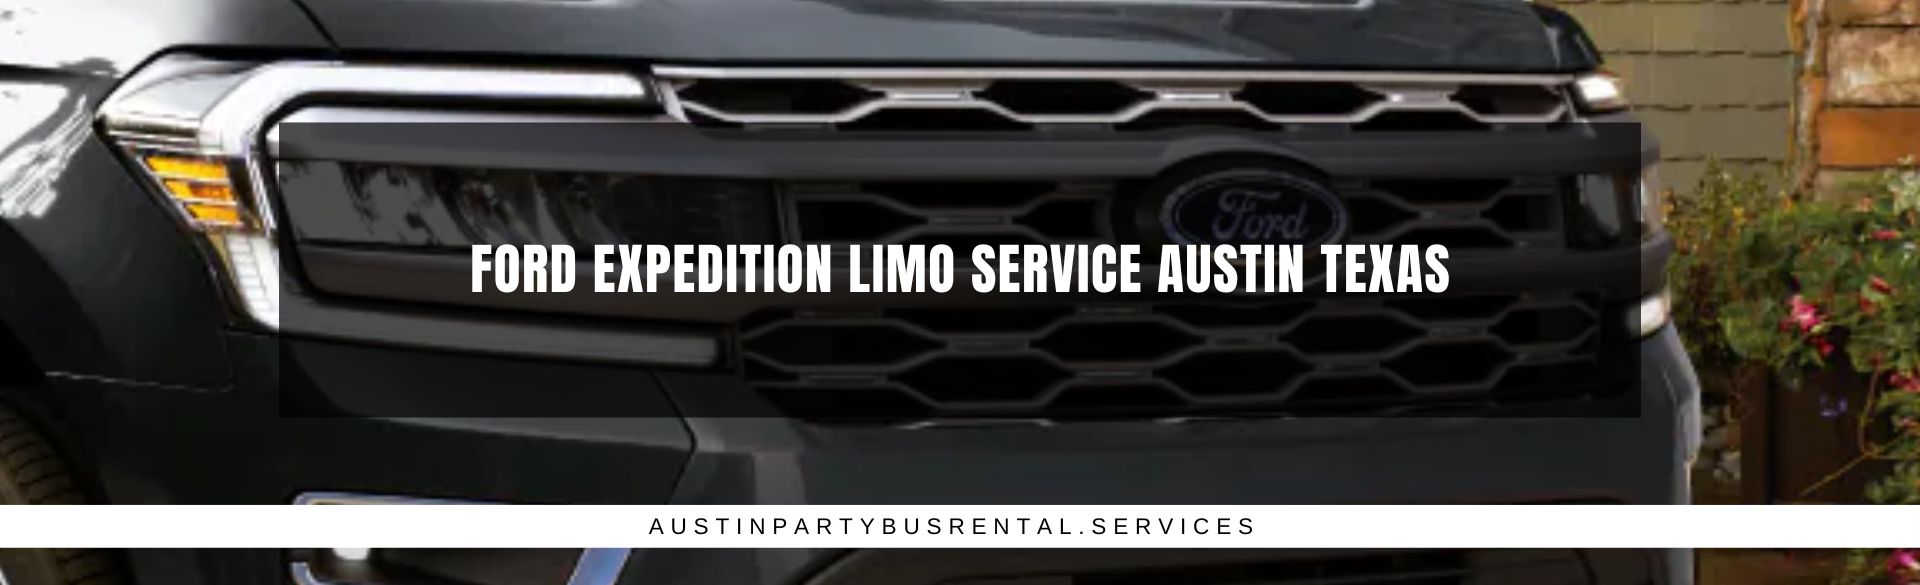 Ford Expedition Limo Service Austin Texas